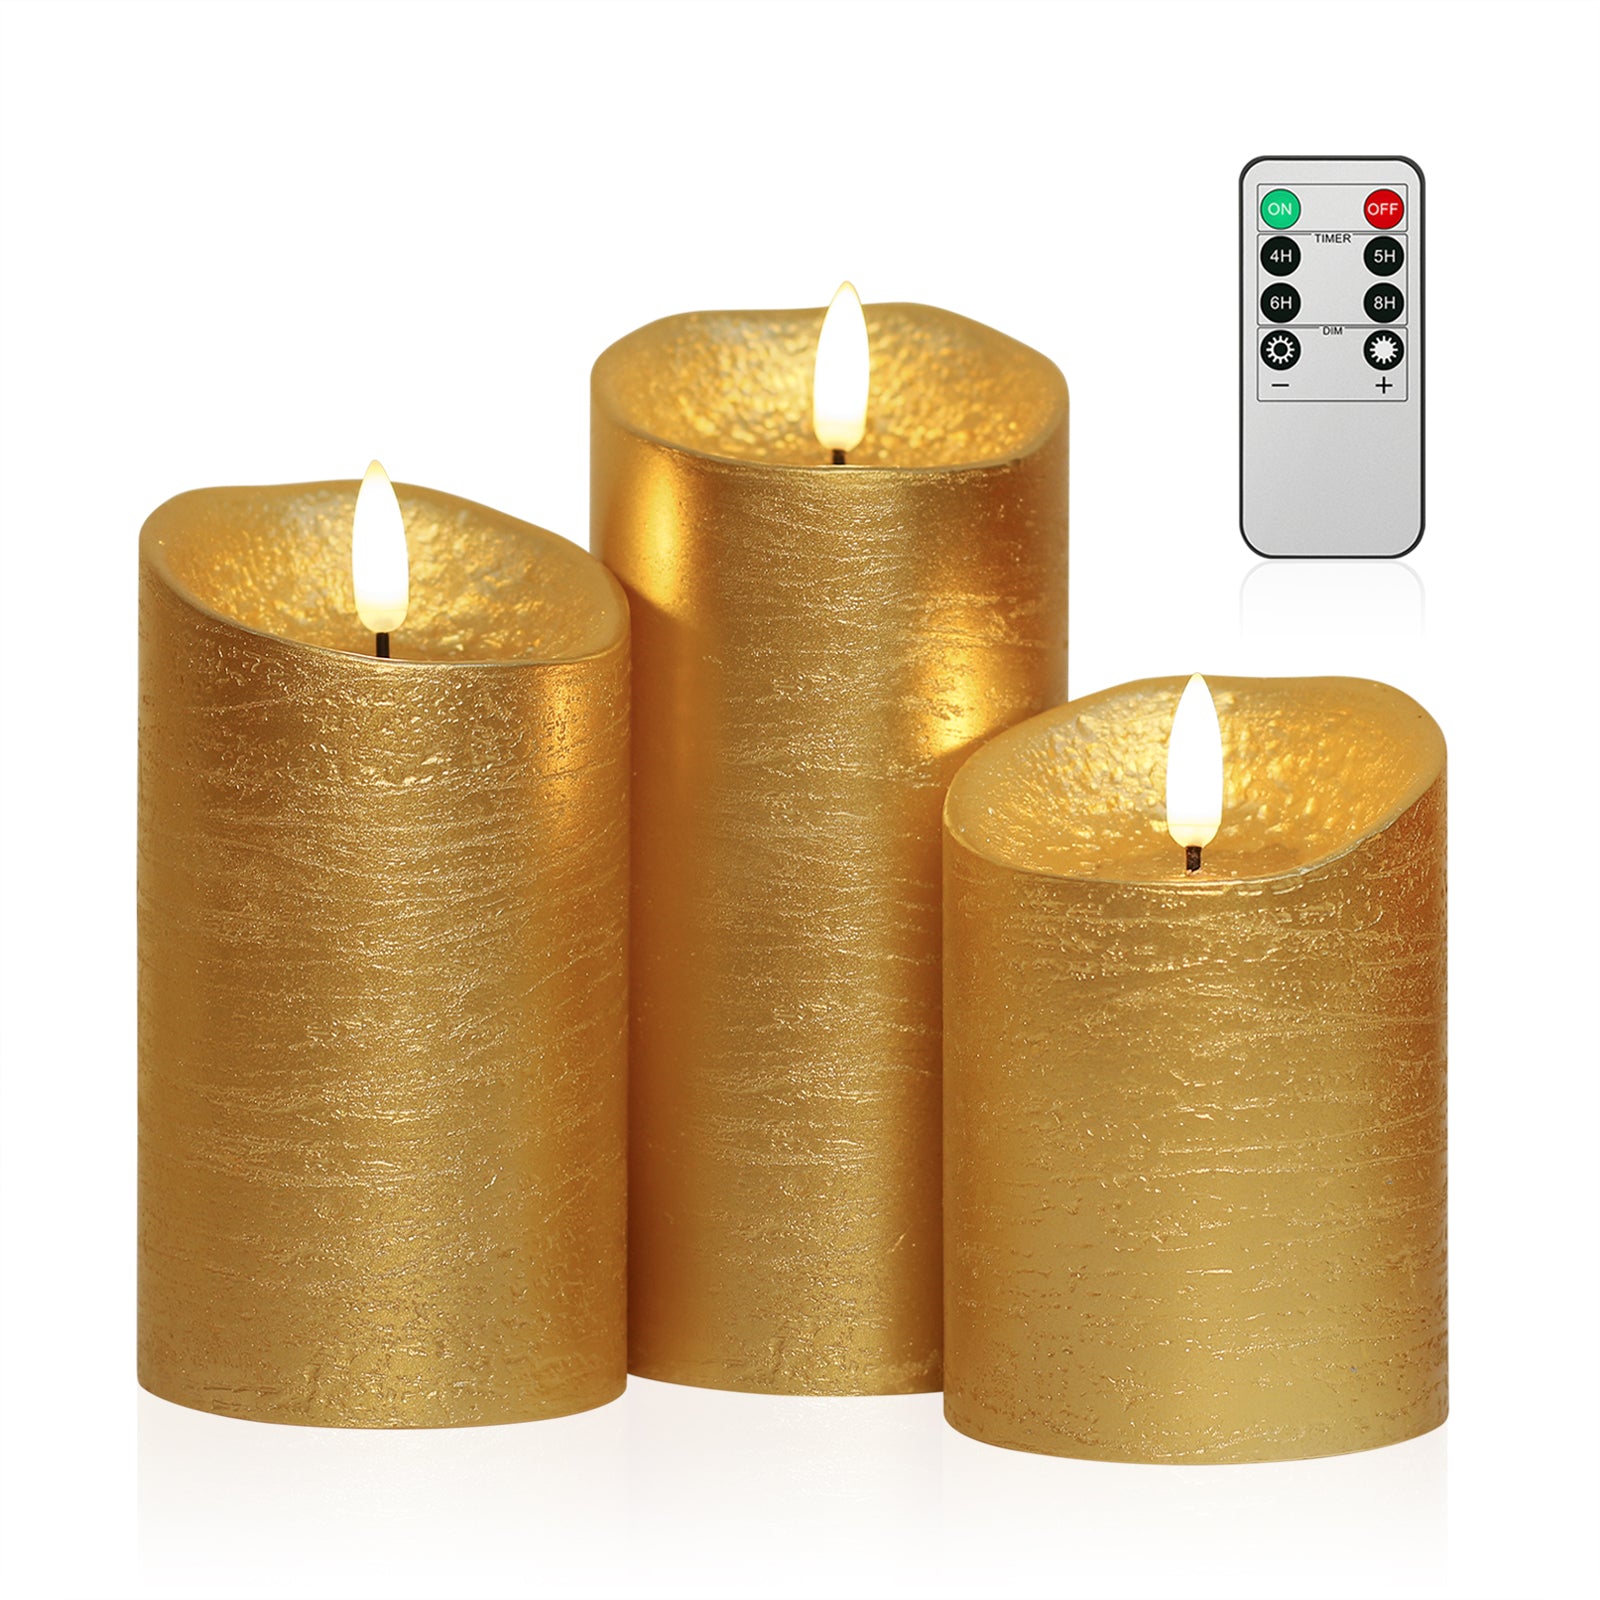 Flameless Candles 3 Pack Set Drip-Less Real Wax Pillars Include Realistic Dancing LED Flames Remote Control with Timer Function